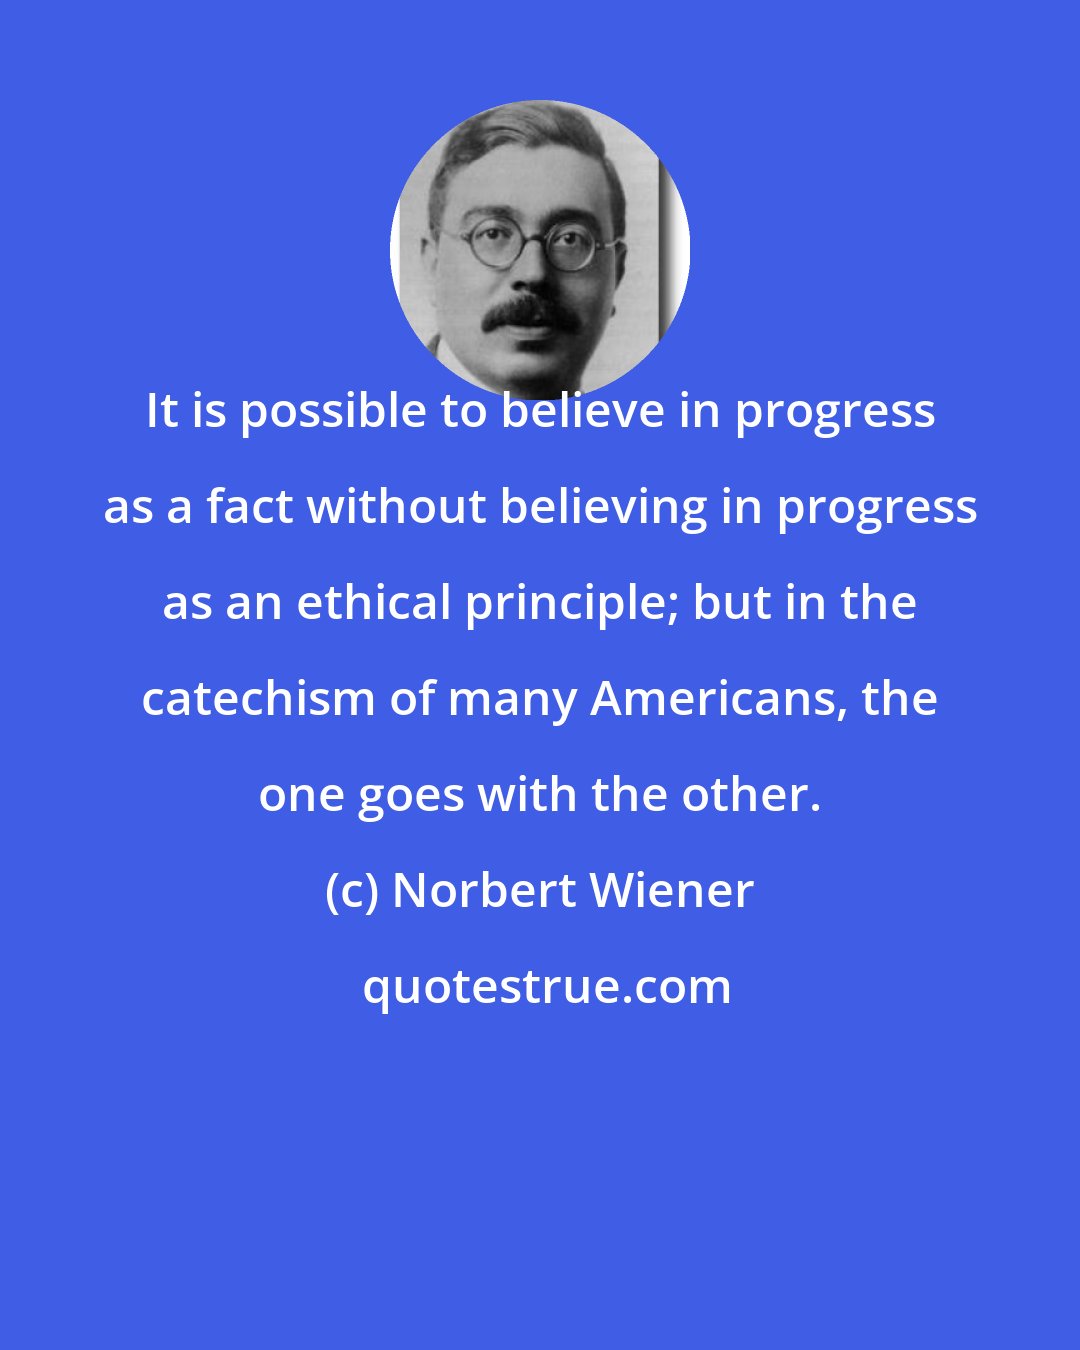 Norbert Wiener: It is possible to believe in progress as a fact without believing in progress as an ethical principle; but in the catechism of many Americans, the one goes with the other.